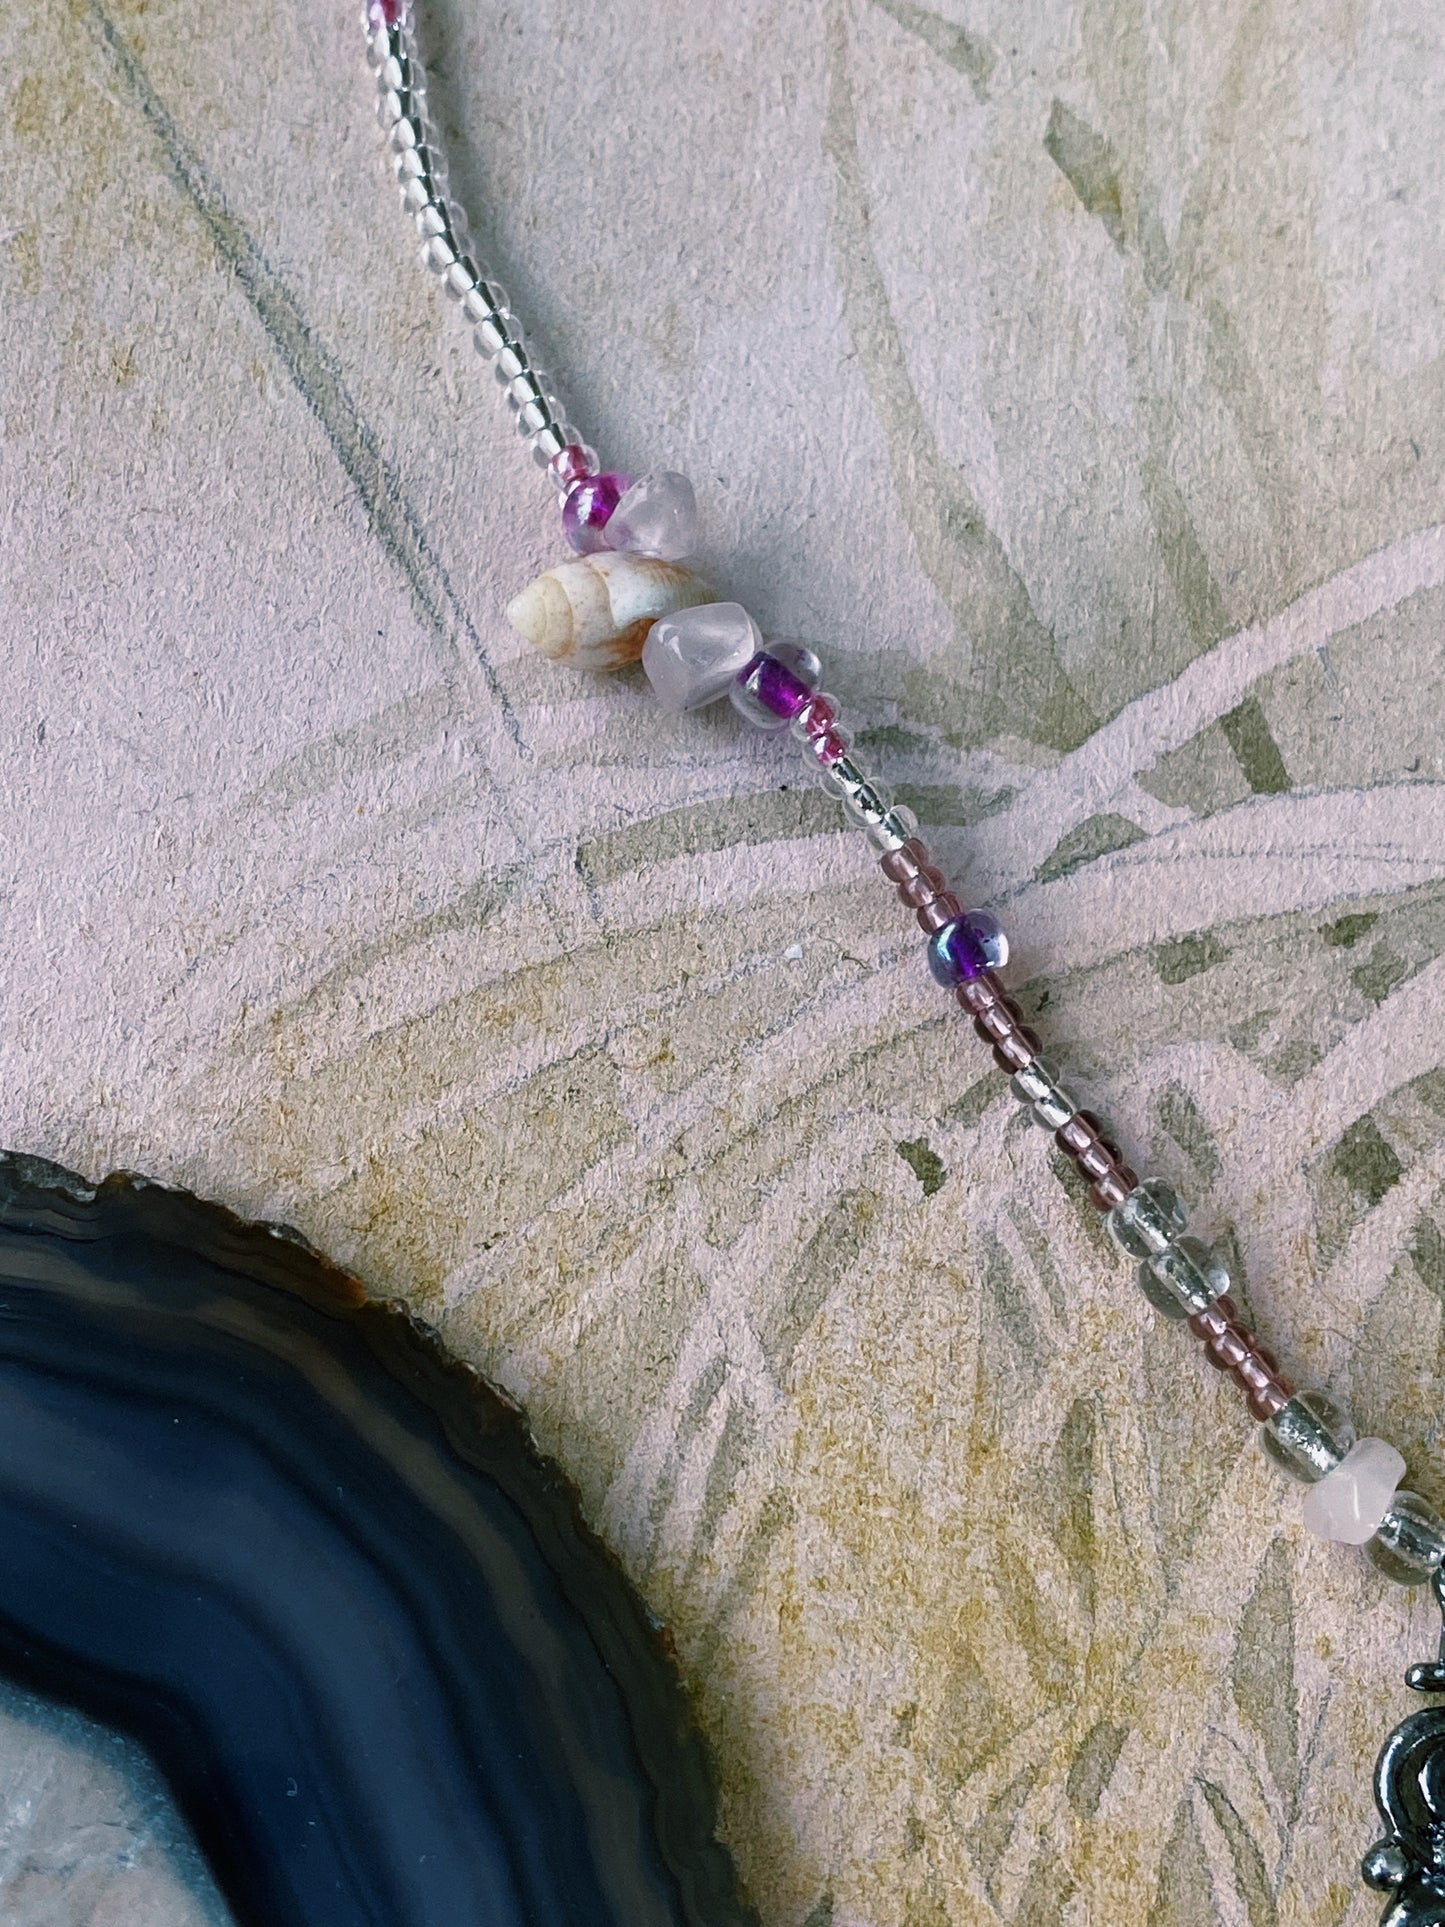 ꩜ volua ꩜ lunar spiral and seashell beaded necklace